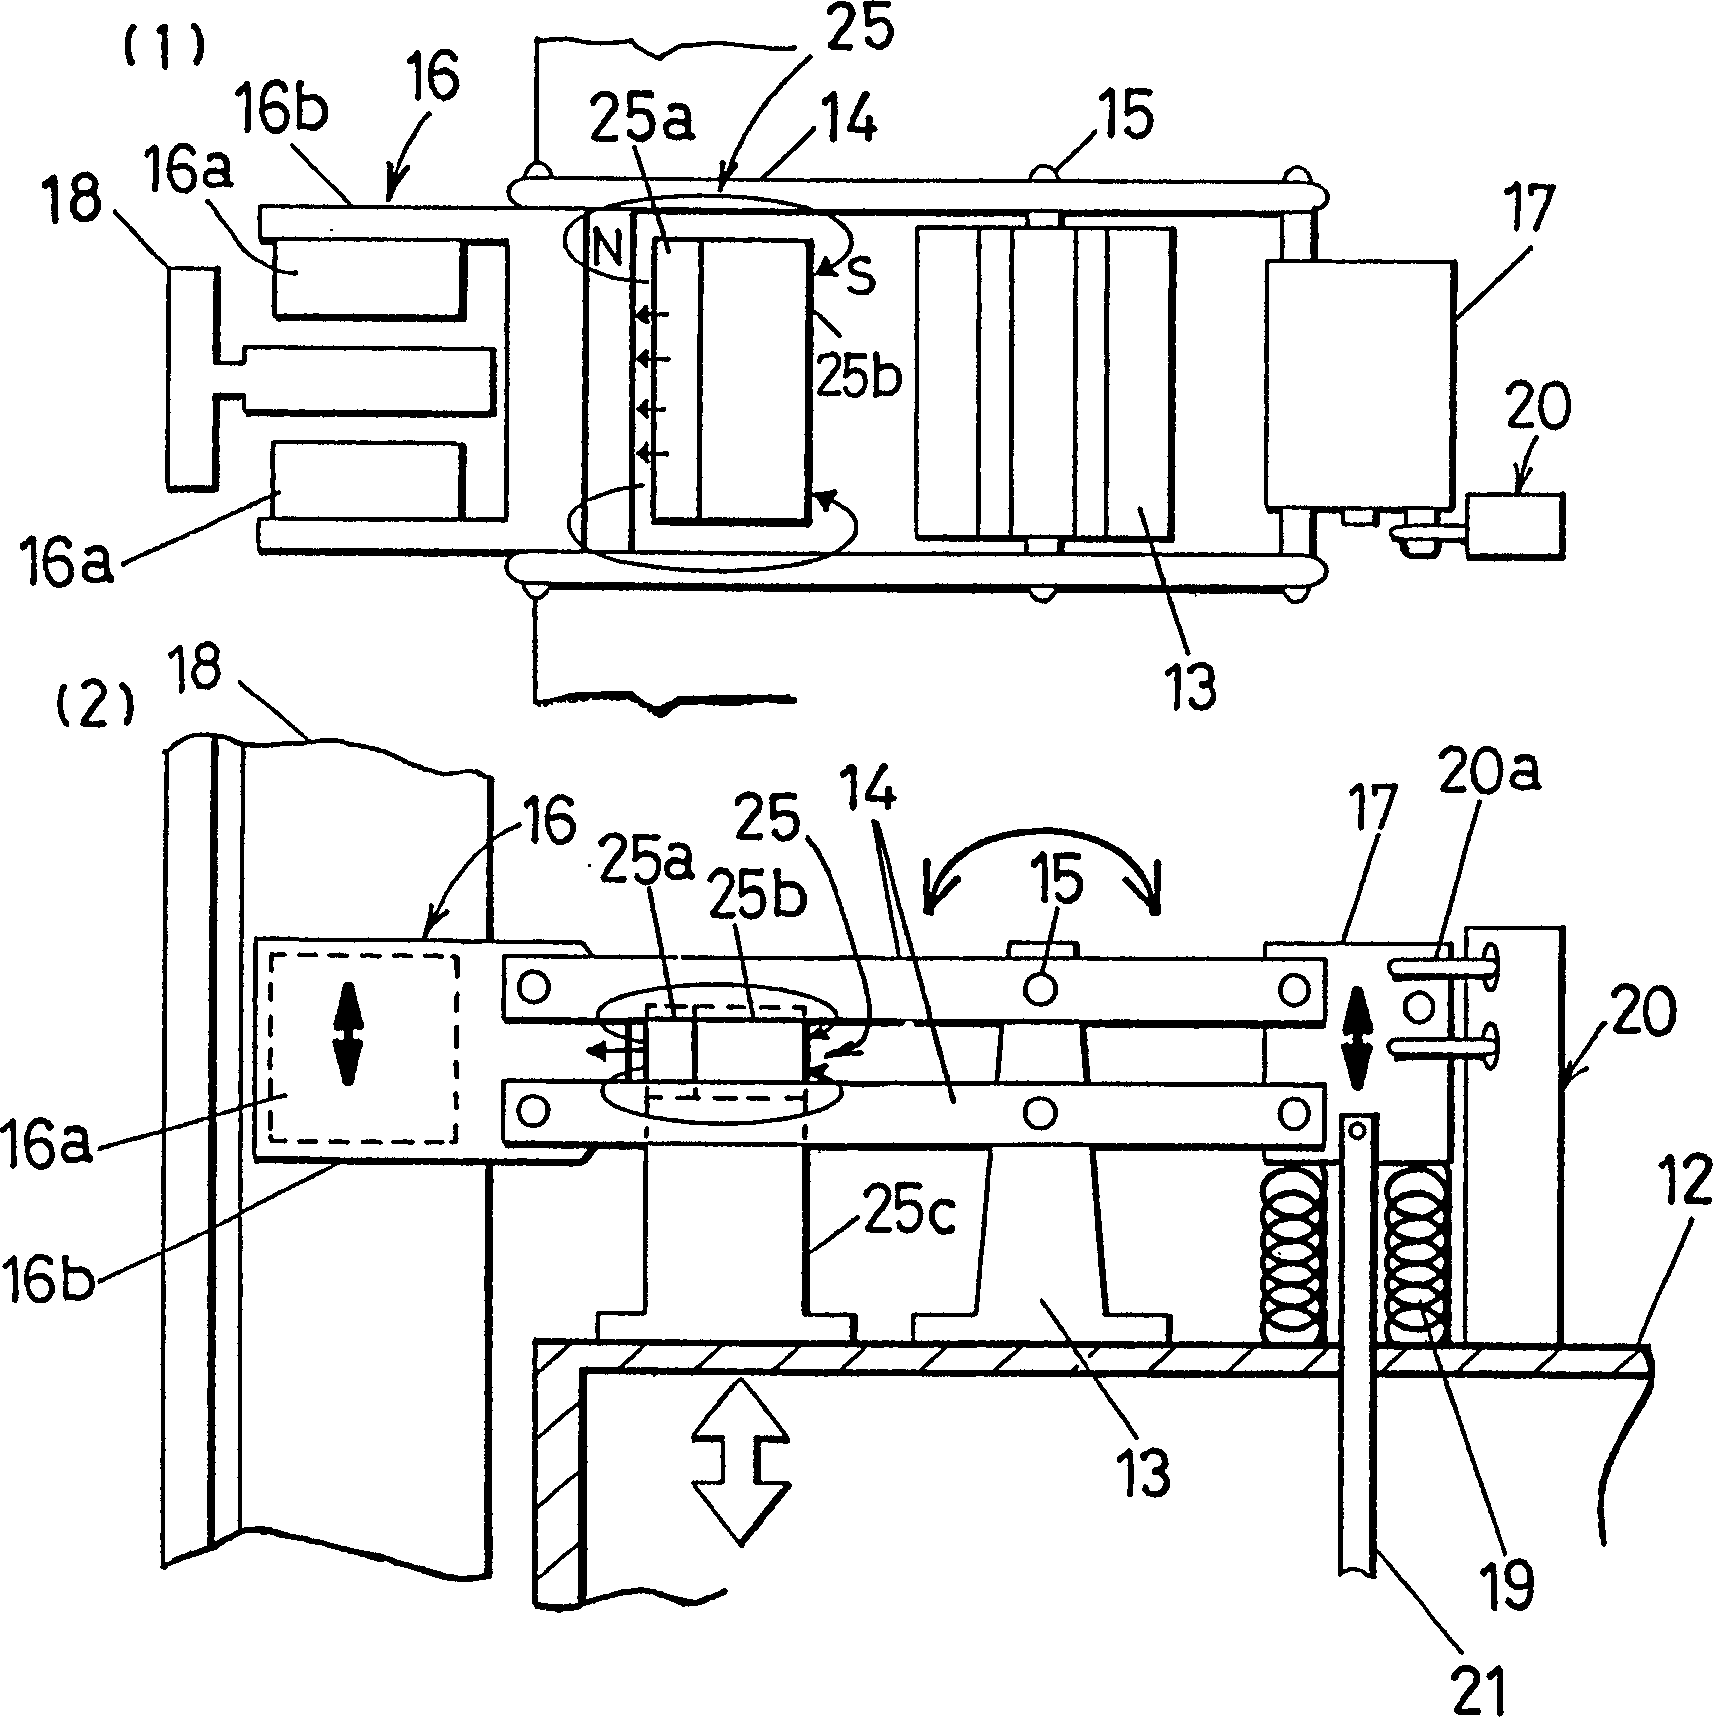 Elevator overspeed protection apparatus